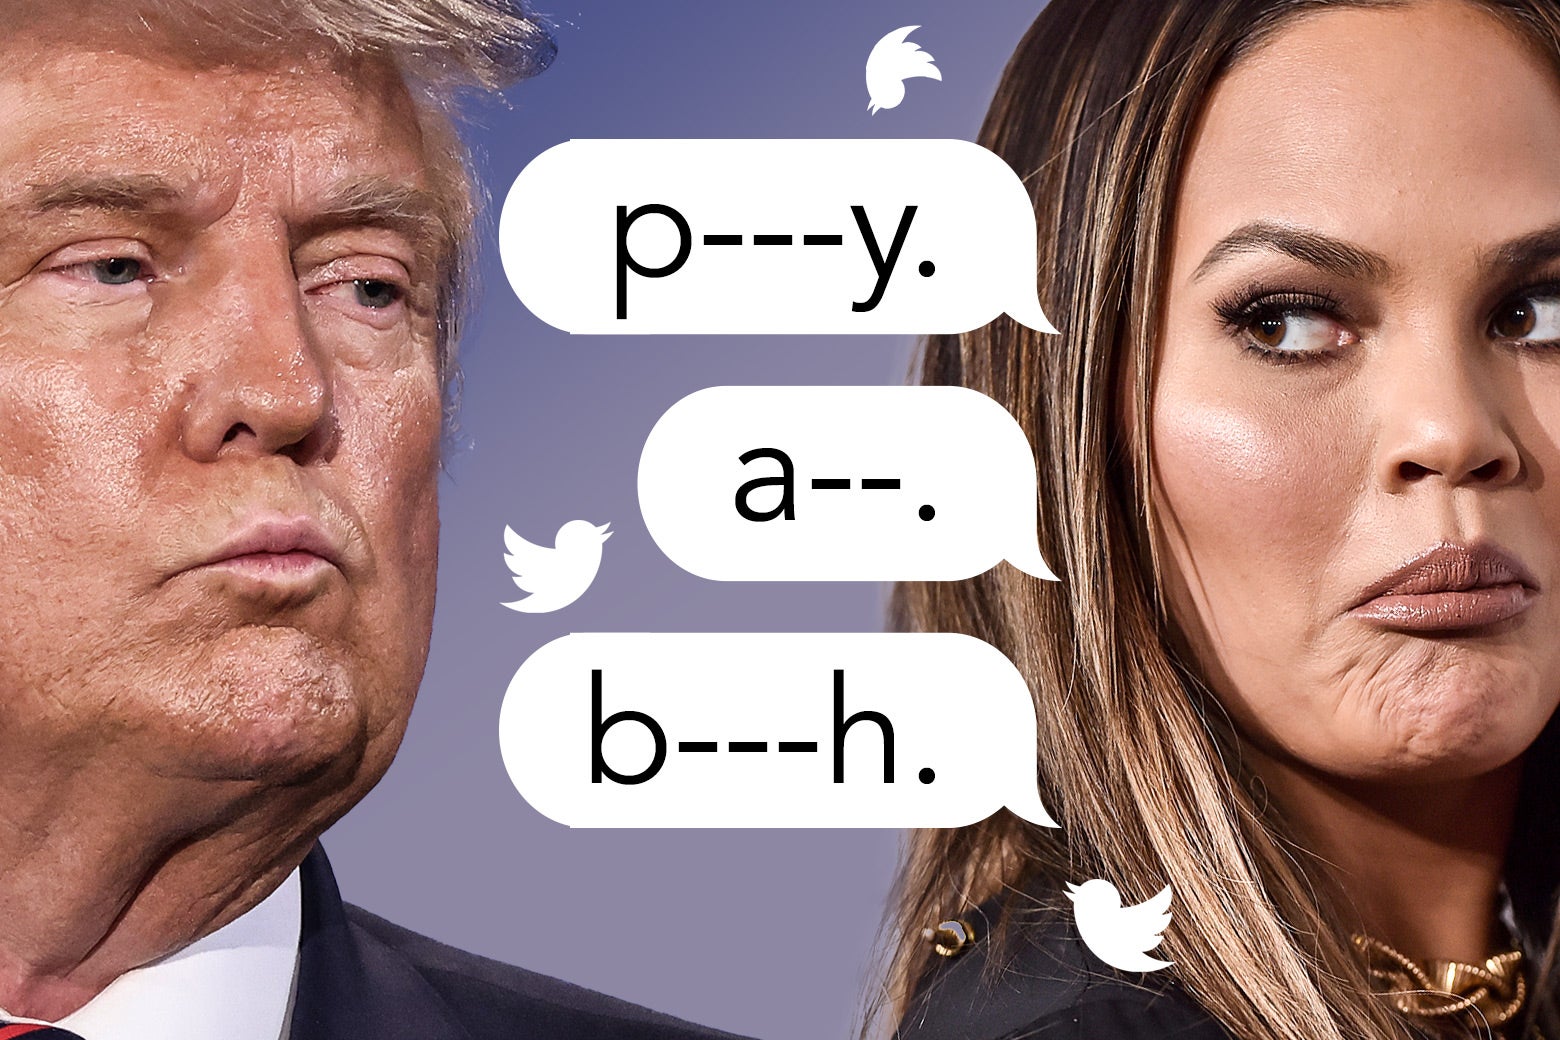 Chrissy Teigen levels Trump with a lame insult he begged Twitter to take down. 